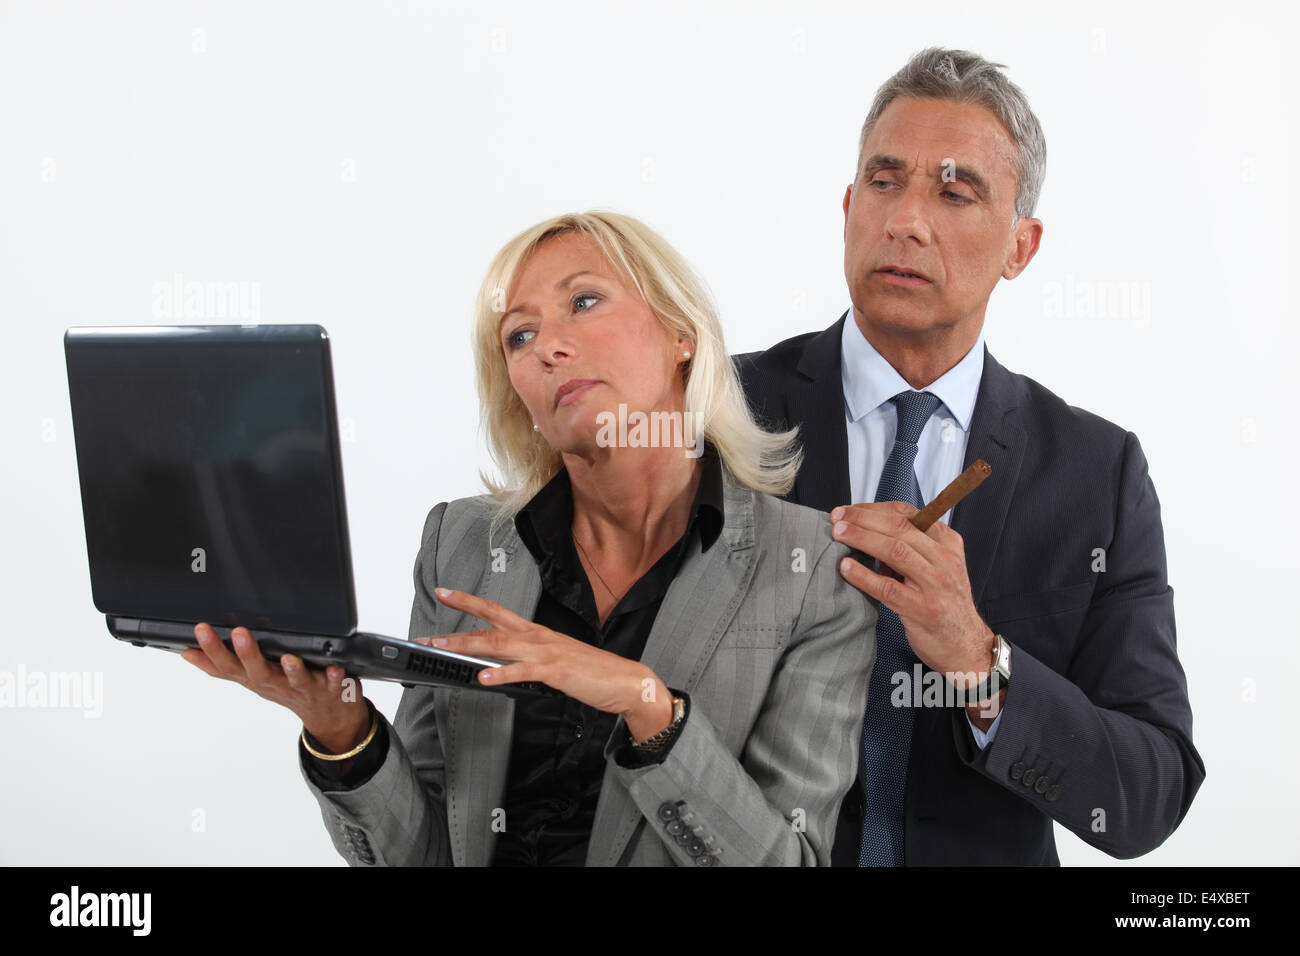 Man putting the moves on his co-worker Stock Photo